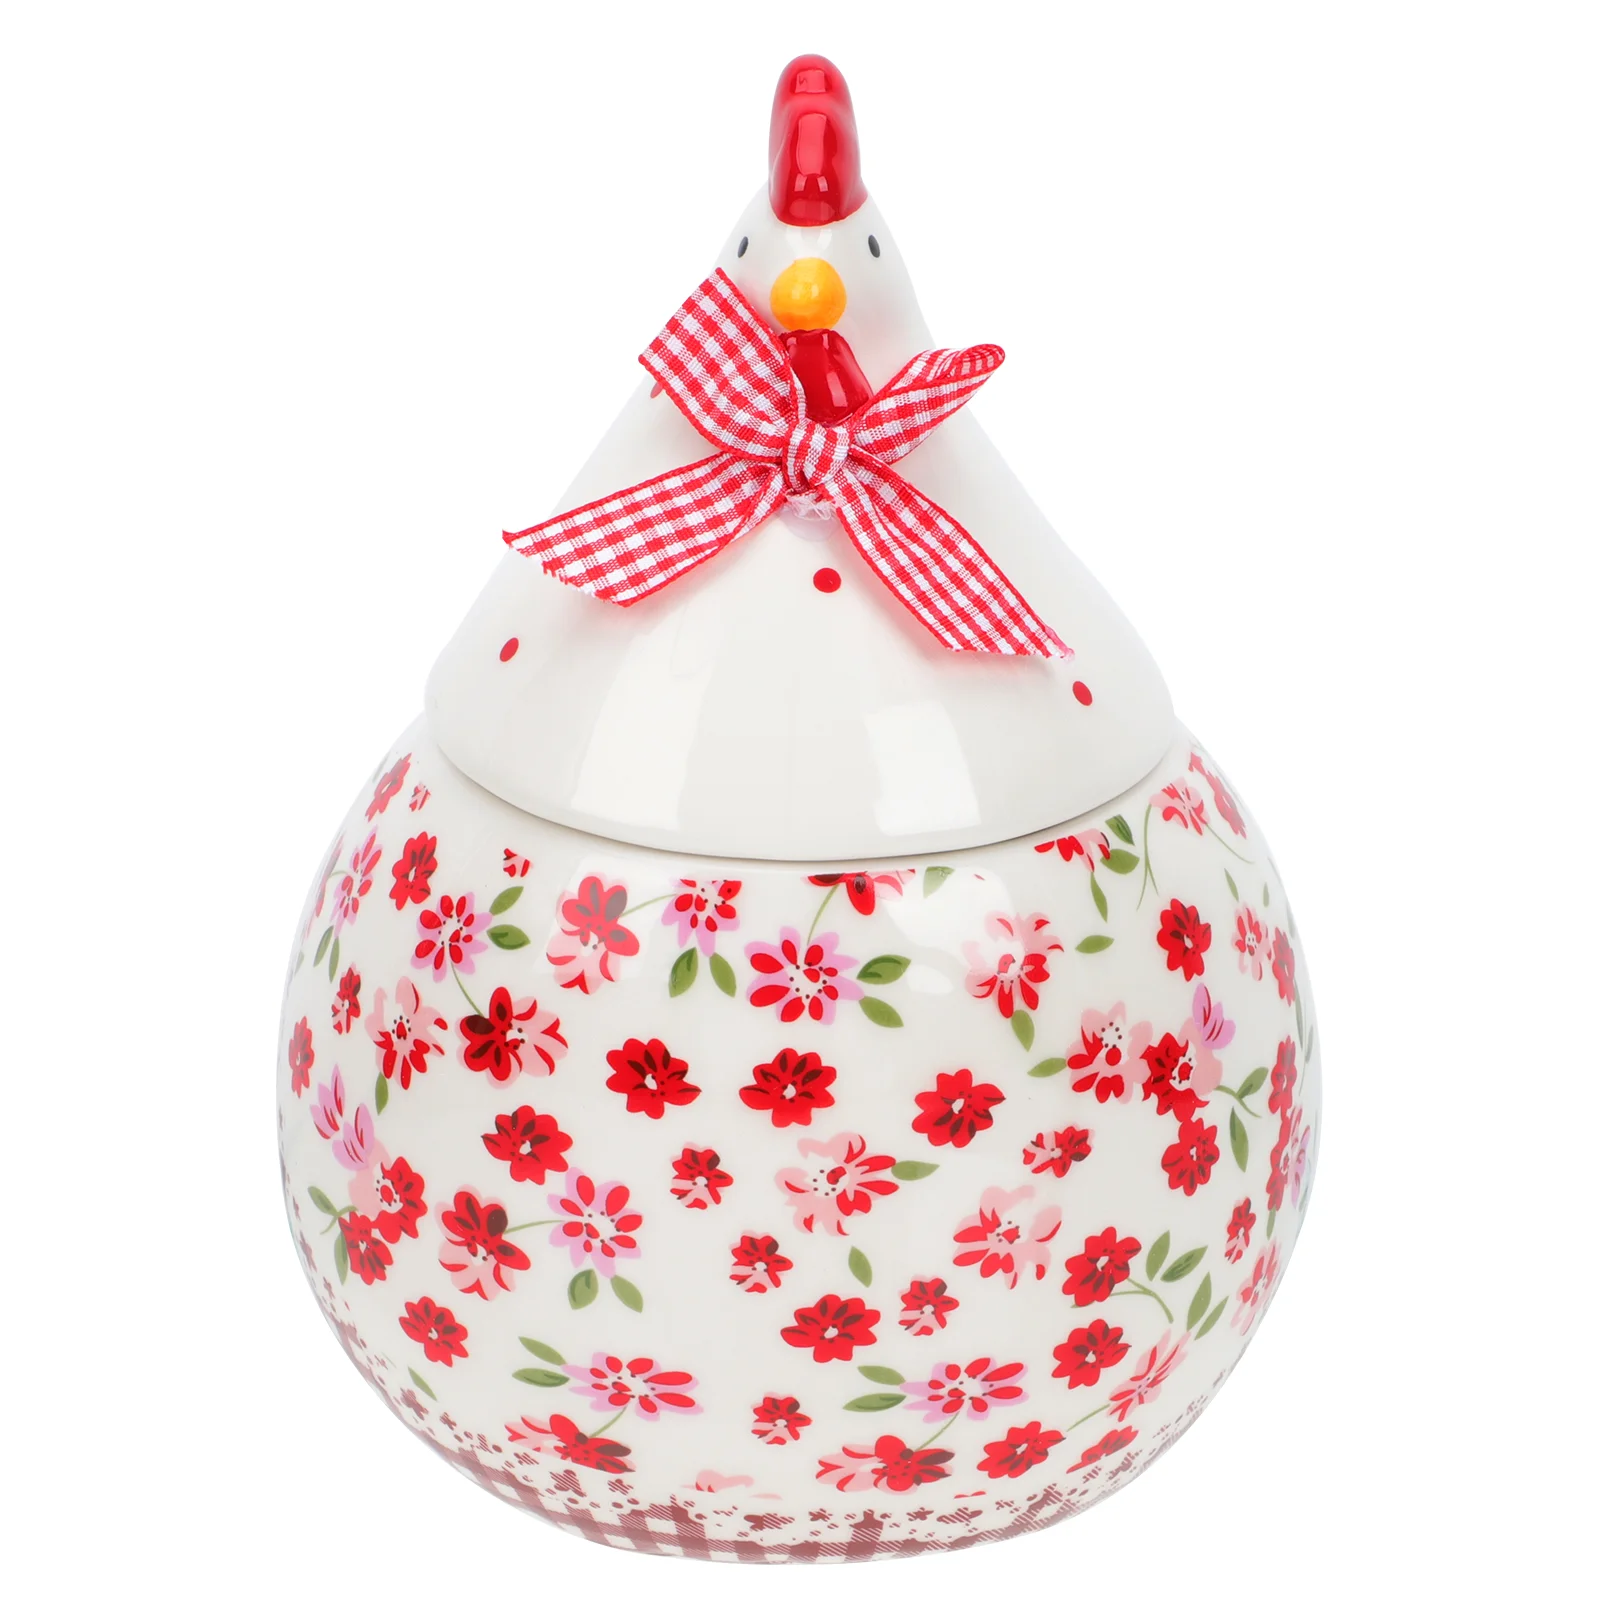 

Jar Ceramic Storage Cookie Easter Canister Candy Chicken Container Tea Kitchen Porcelain Rooster Hen Containers Egg Holder